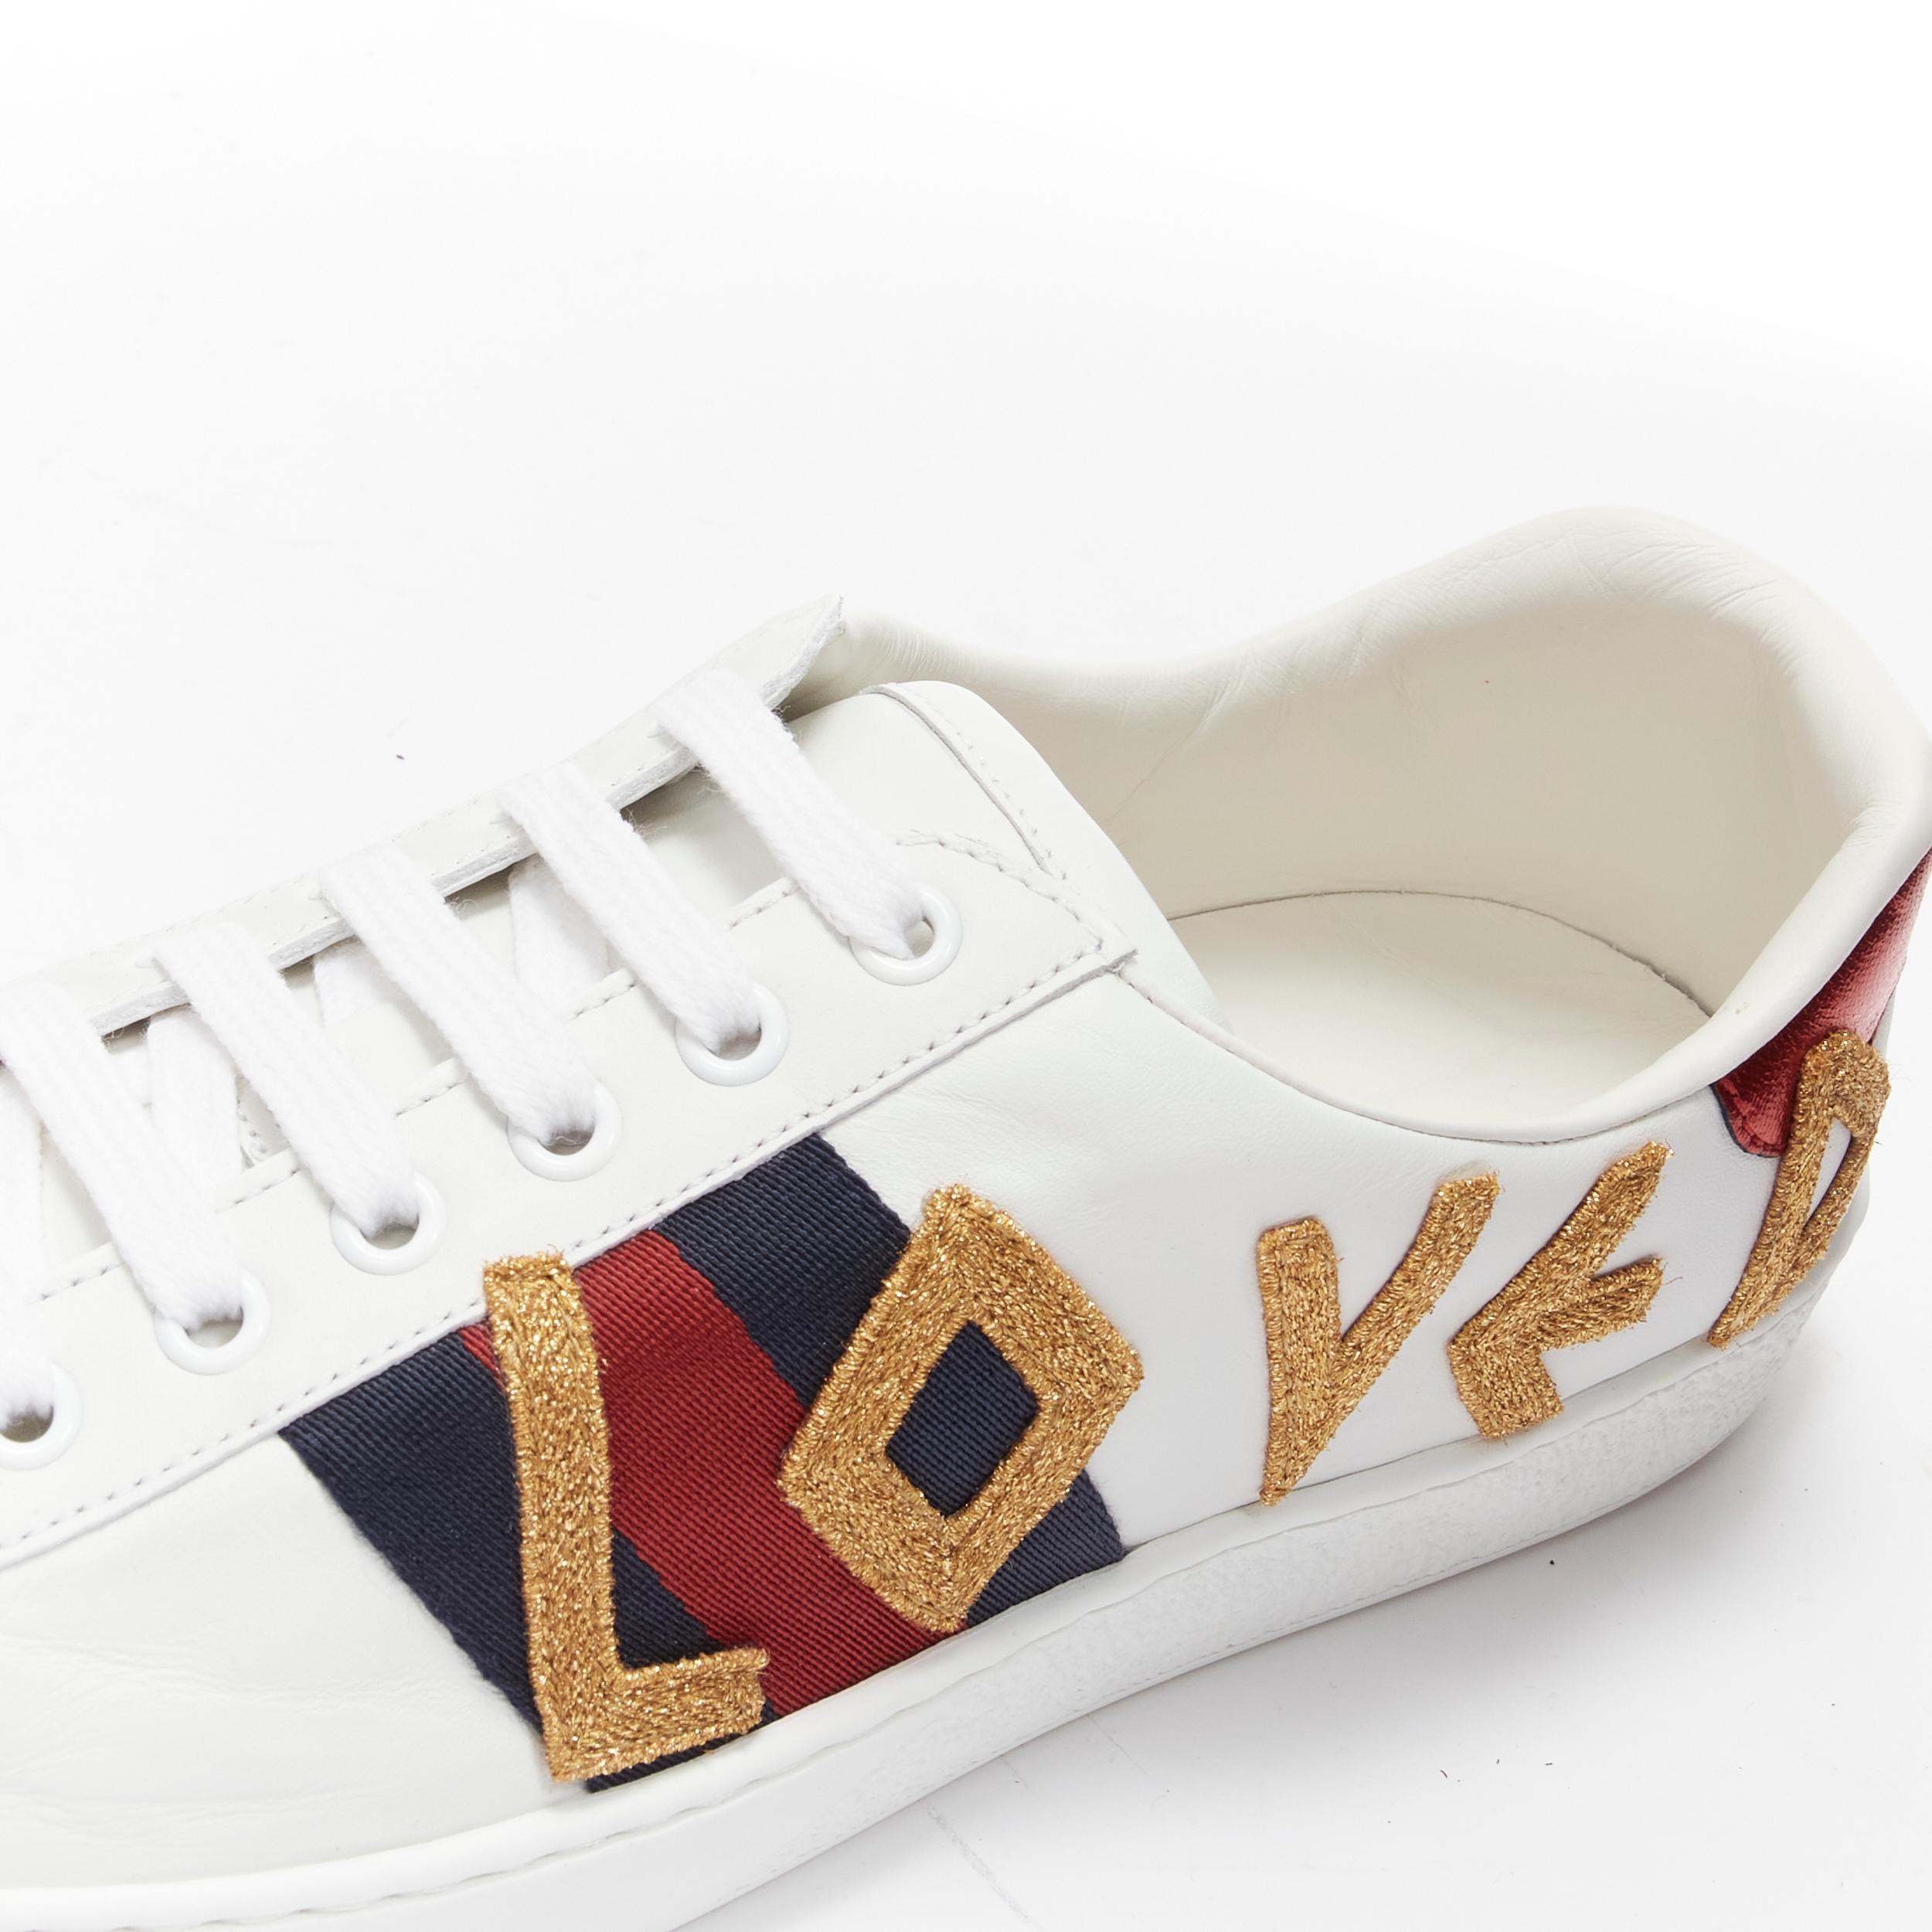 GUCCI Ace Loved gold embroidered blue red web leather sneakers UK7 EU41
Reference: TGAS/B02018
Brand: Gucci
Designer: Alessandro Michele
Model: 497090
Collection: Ace Loved
Material: Leather
Color: White
Pattern: Solid
Closure: Lace Up
Lining: